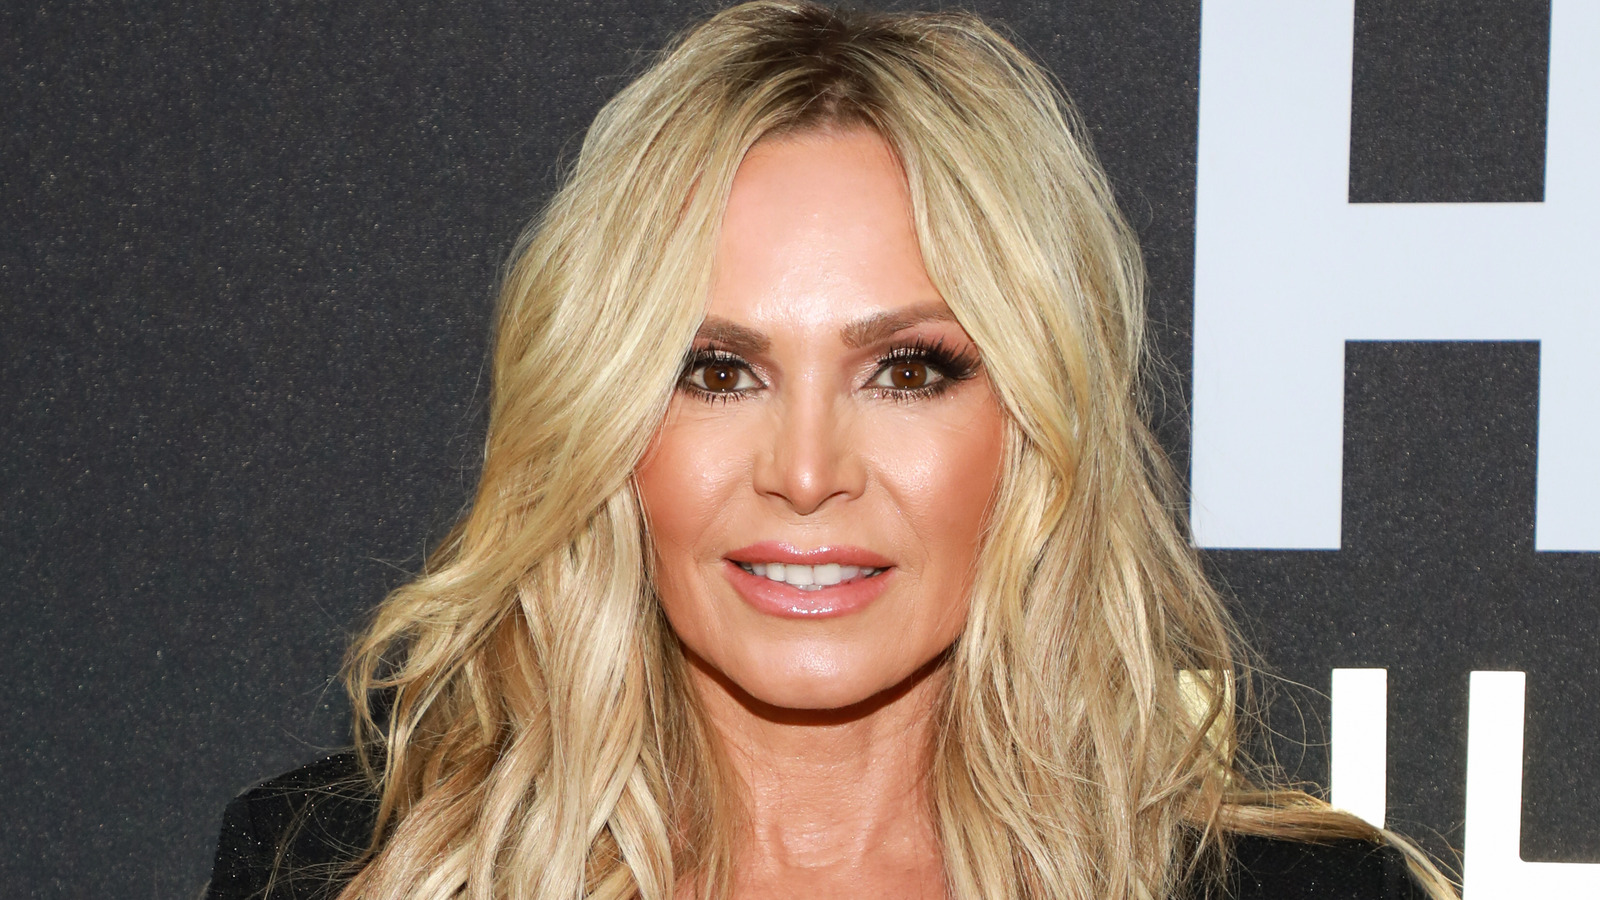 Real Housewives' Tamra Judge And Teresa Giudice's Feud Explained - Safe ...